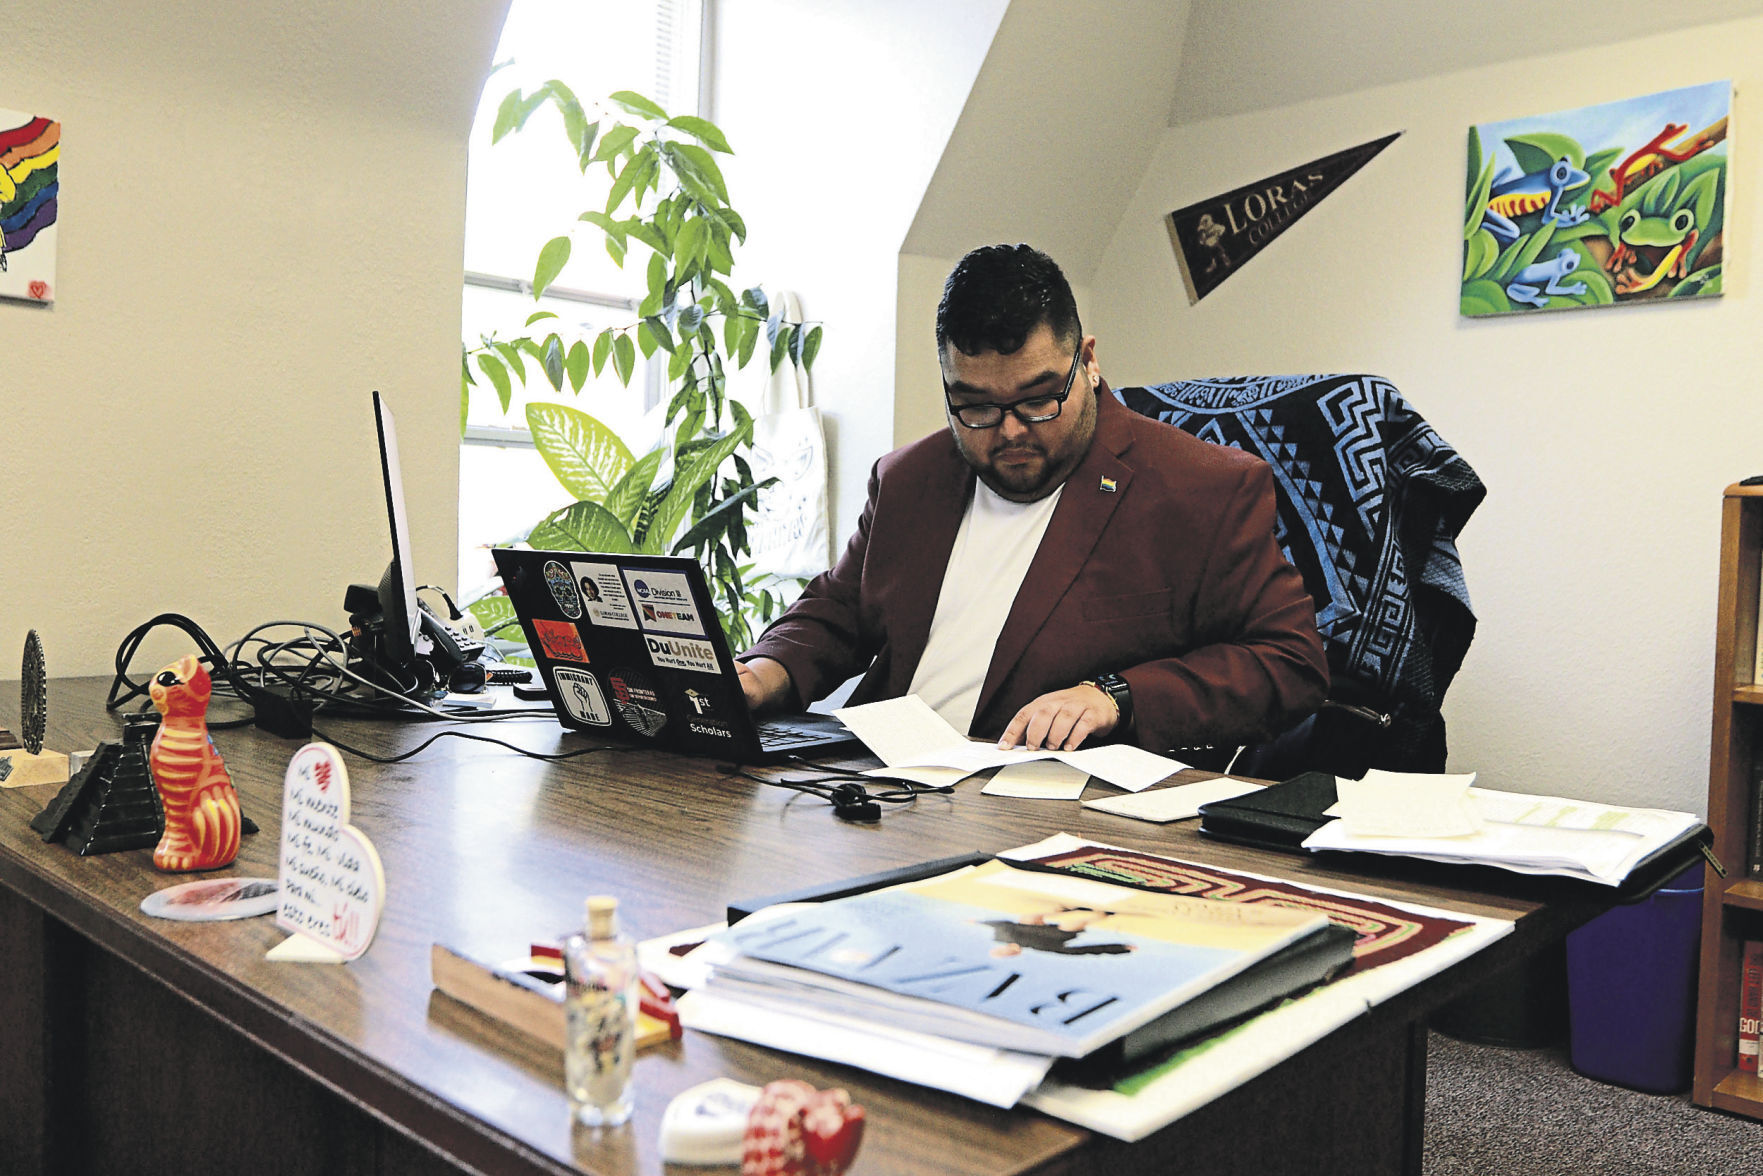 Sergio Perez works in his office at Loras College.    PHOTO CREDIT: Katie Goodale/Telegraph Herald